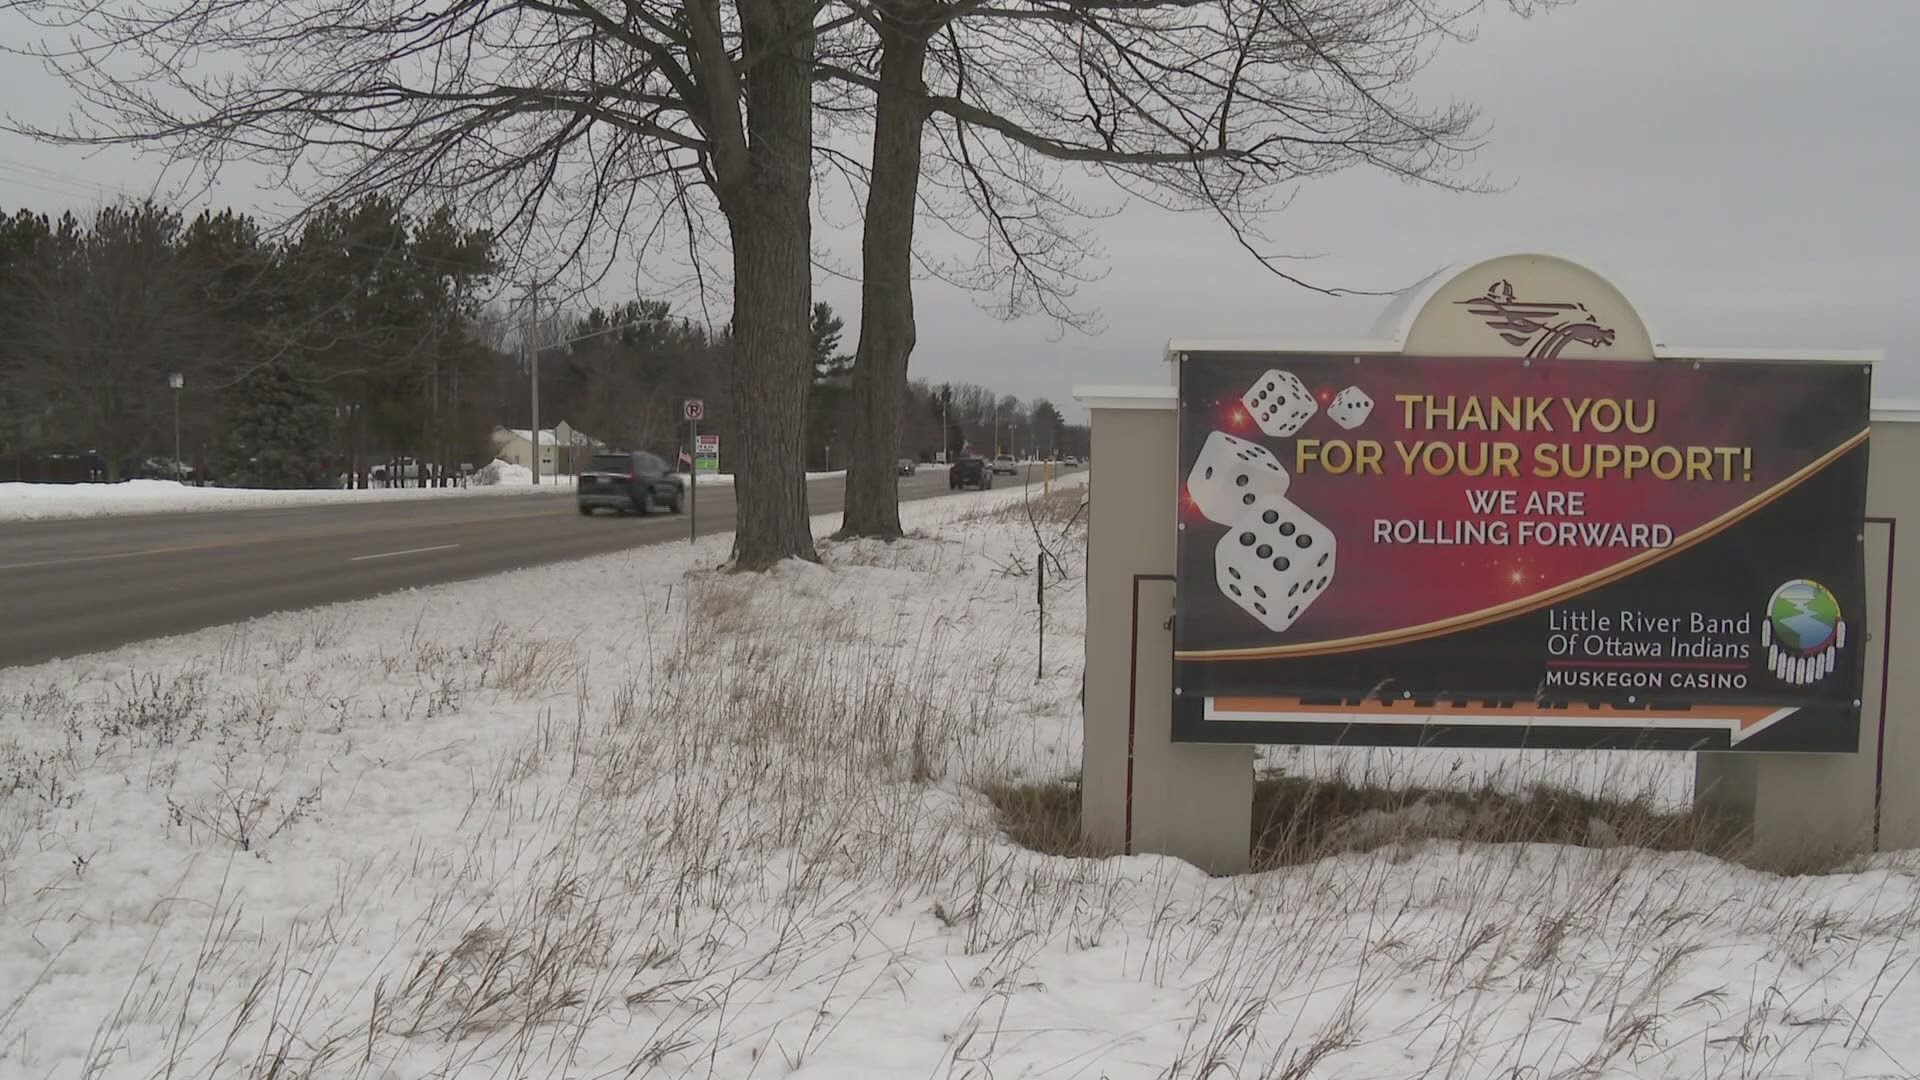 Little River Band of Ottawa Indians' Ogema Larry Romanelli tells 13 ON YOUR SIDE the Bureau of Indian Affairs has approved plans for a casino in Fruitport Township.